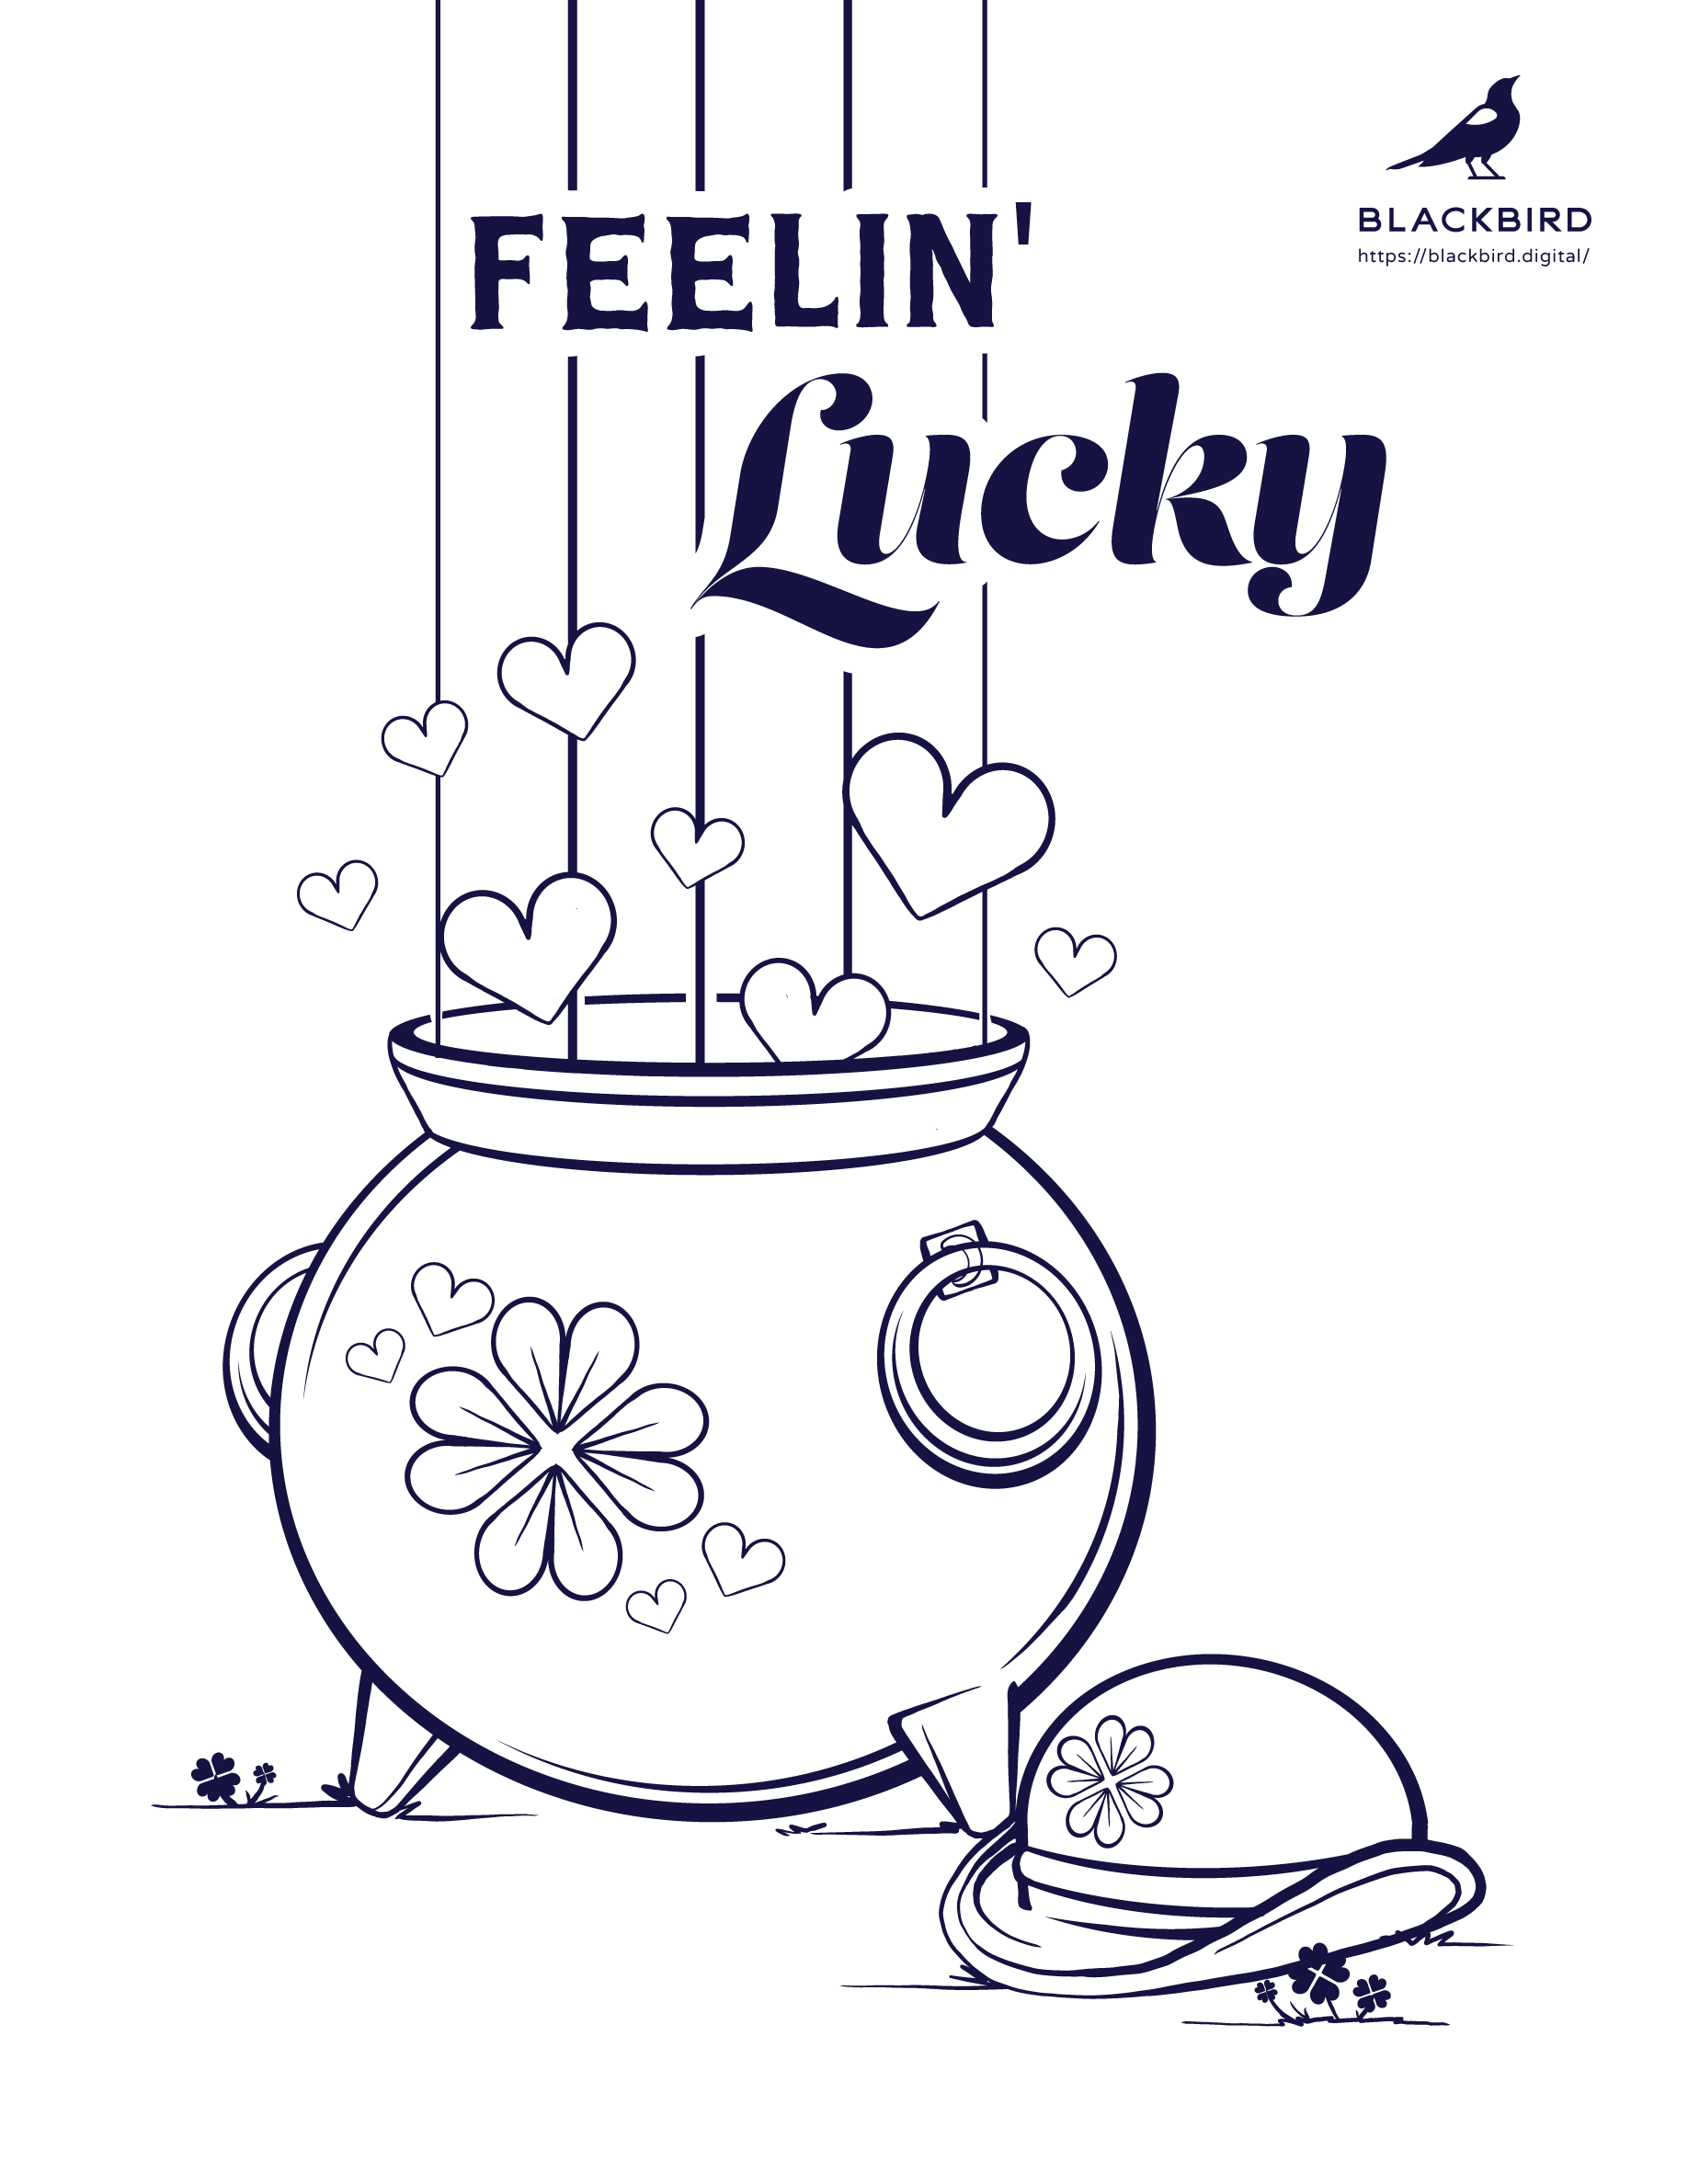 Coloring page style illustration of a pot with a four-leaf clover design bursting with hearts and the words "Feelin' Lucky", and a small bowler hat on the ground.